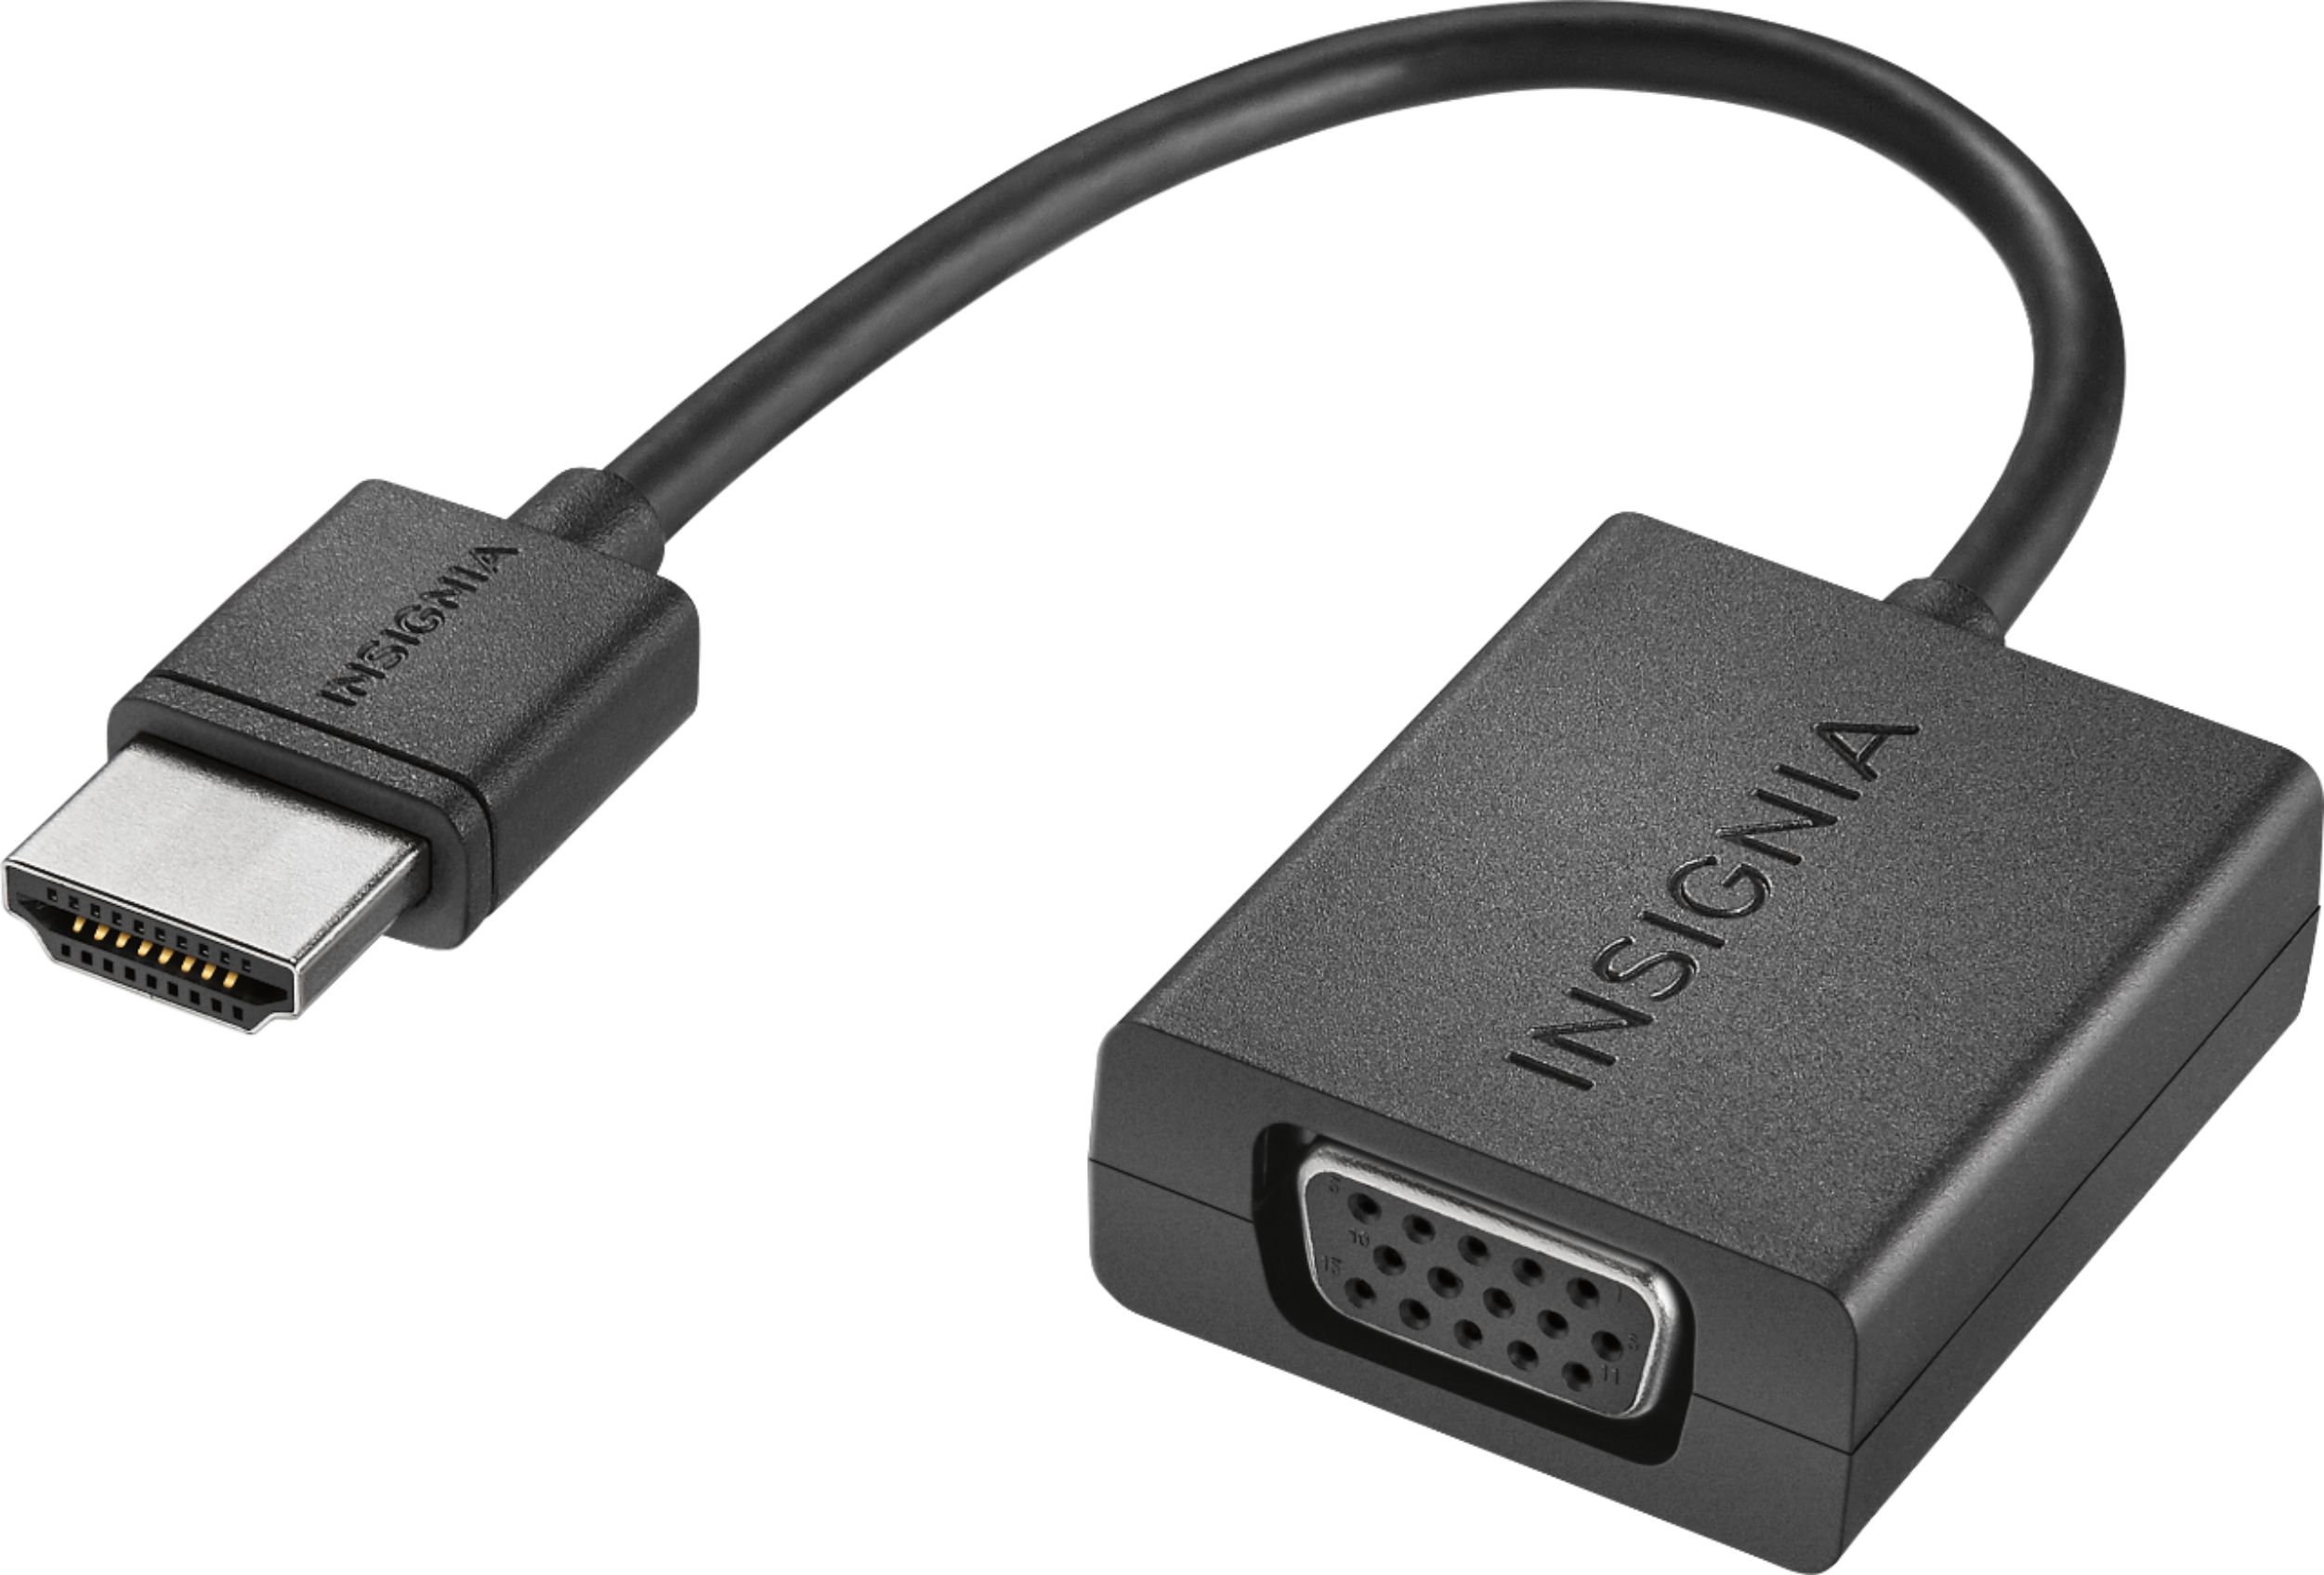 video source for mac to hdmi cable monitor